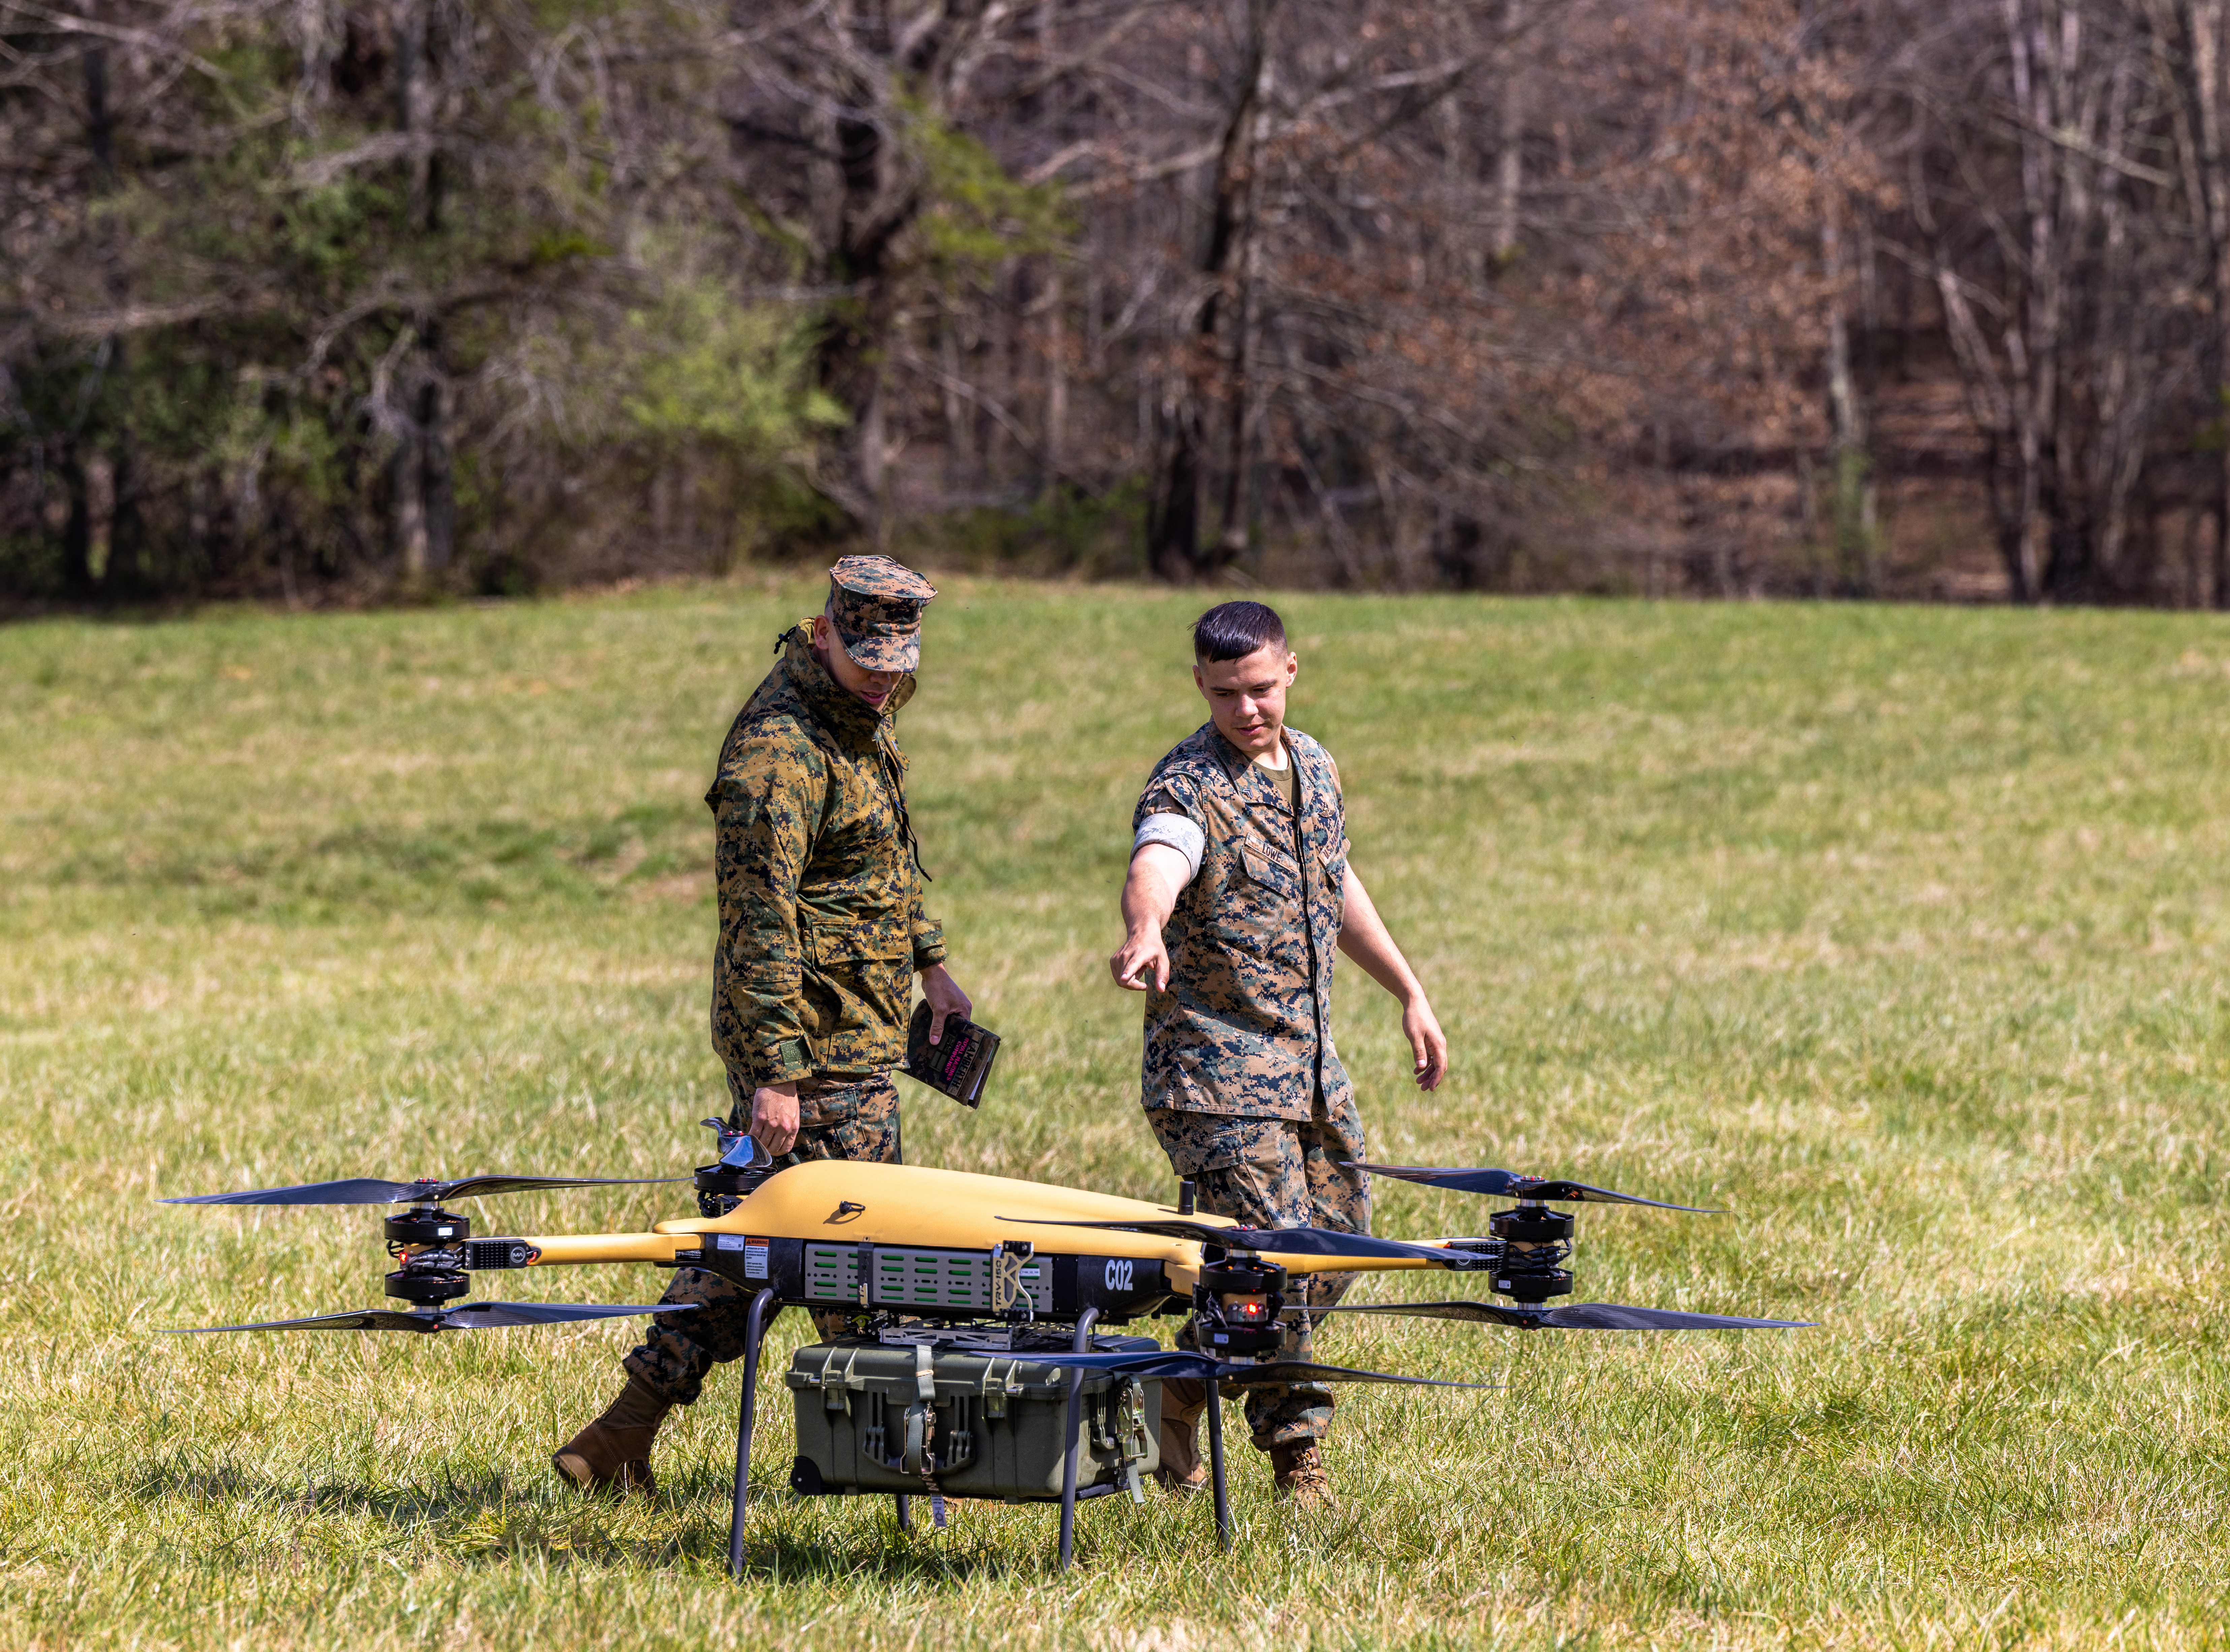 Delivery Drones: What are Tactical Resupply Unmanned Aircraft Systems?